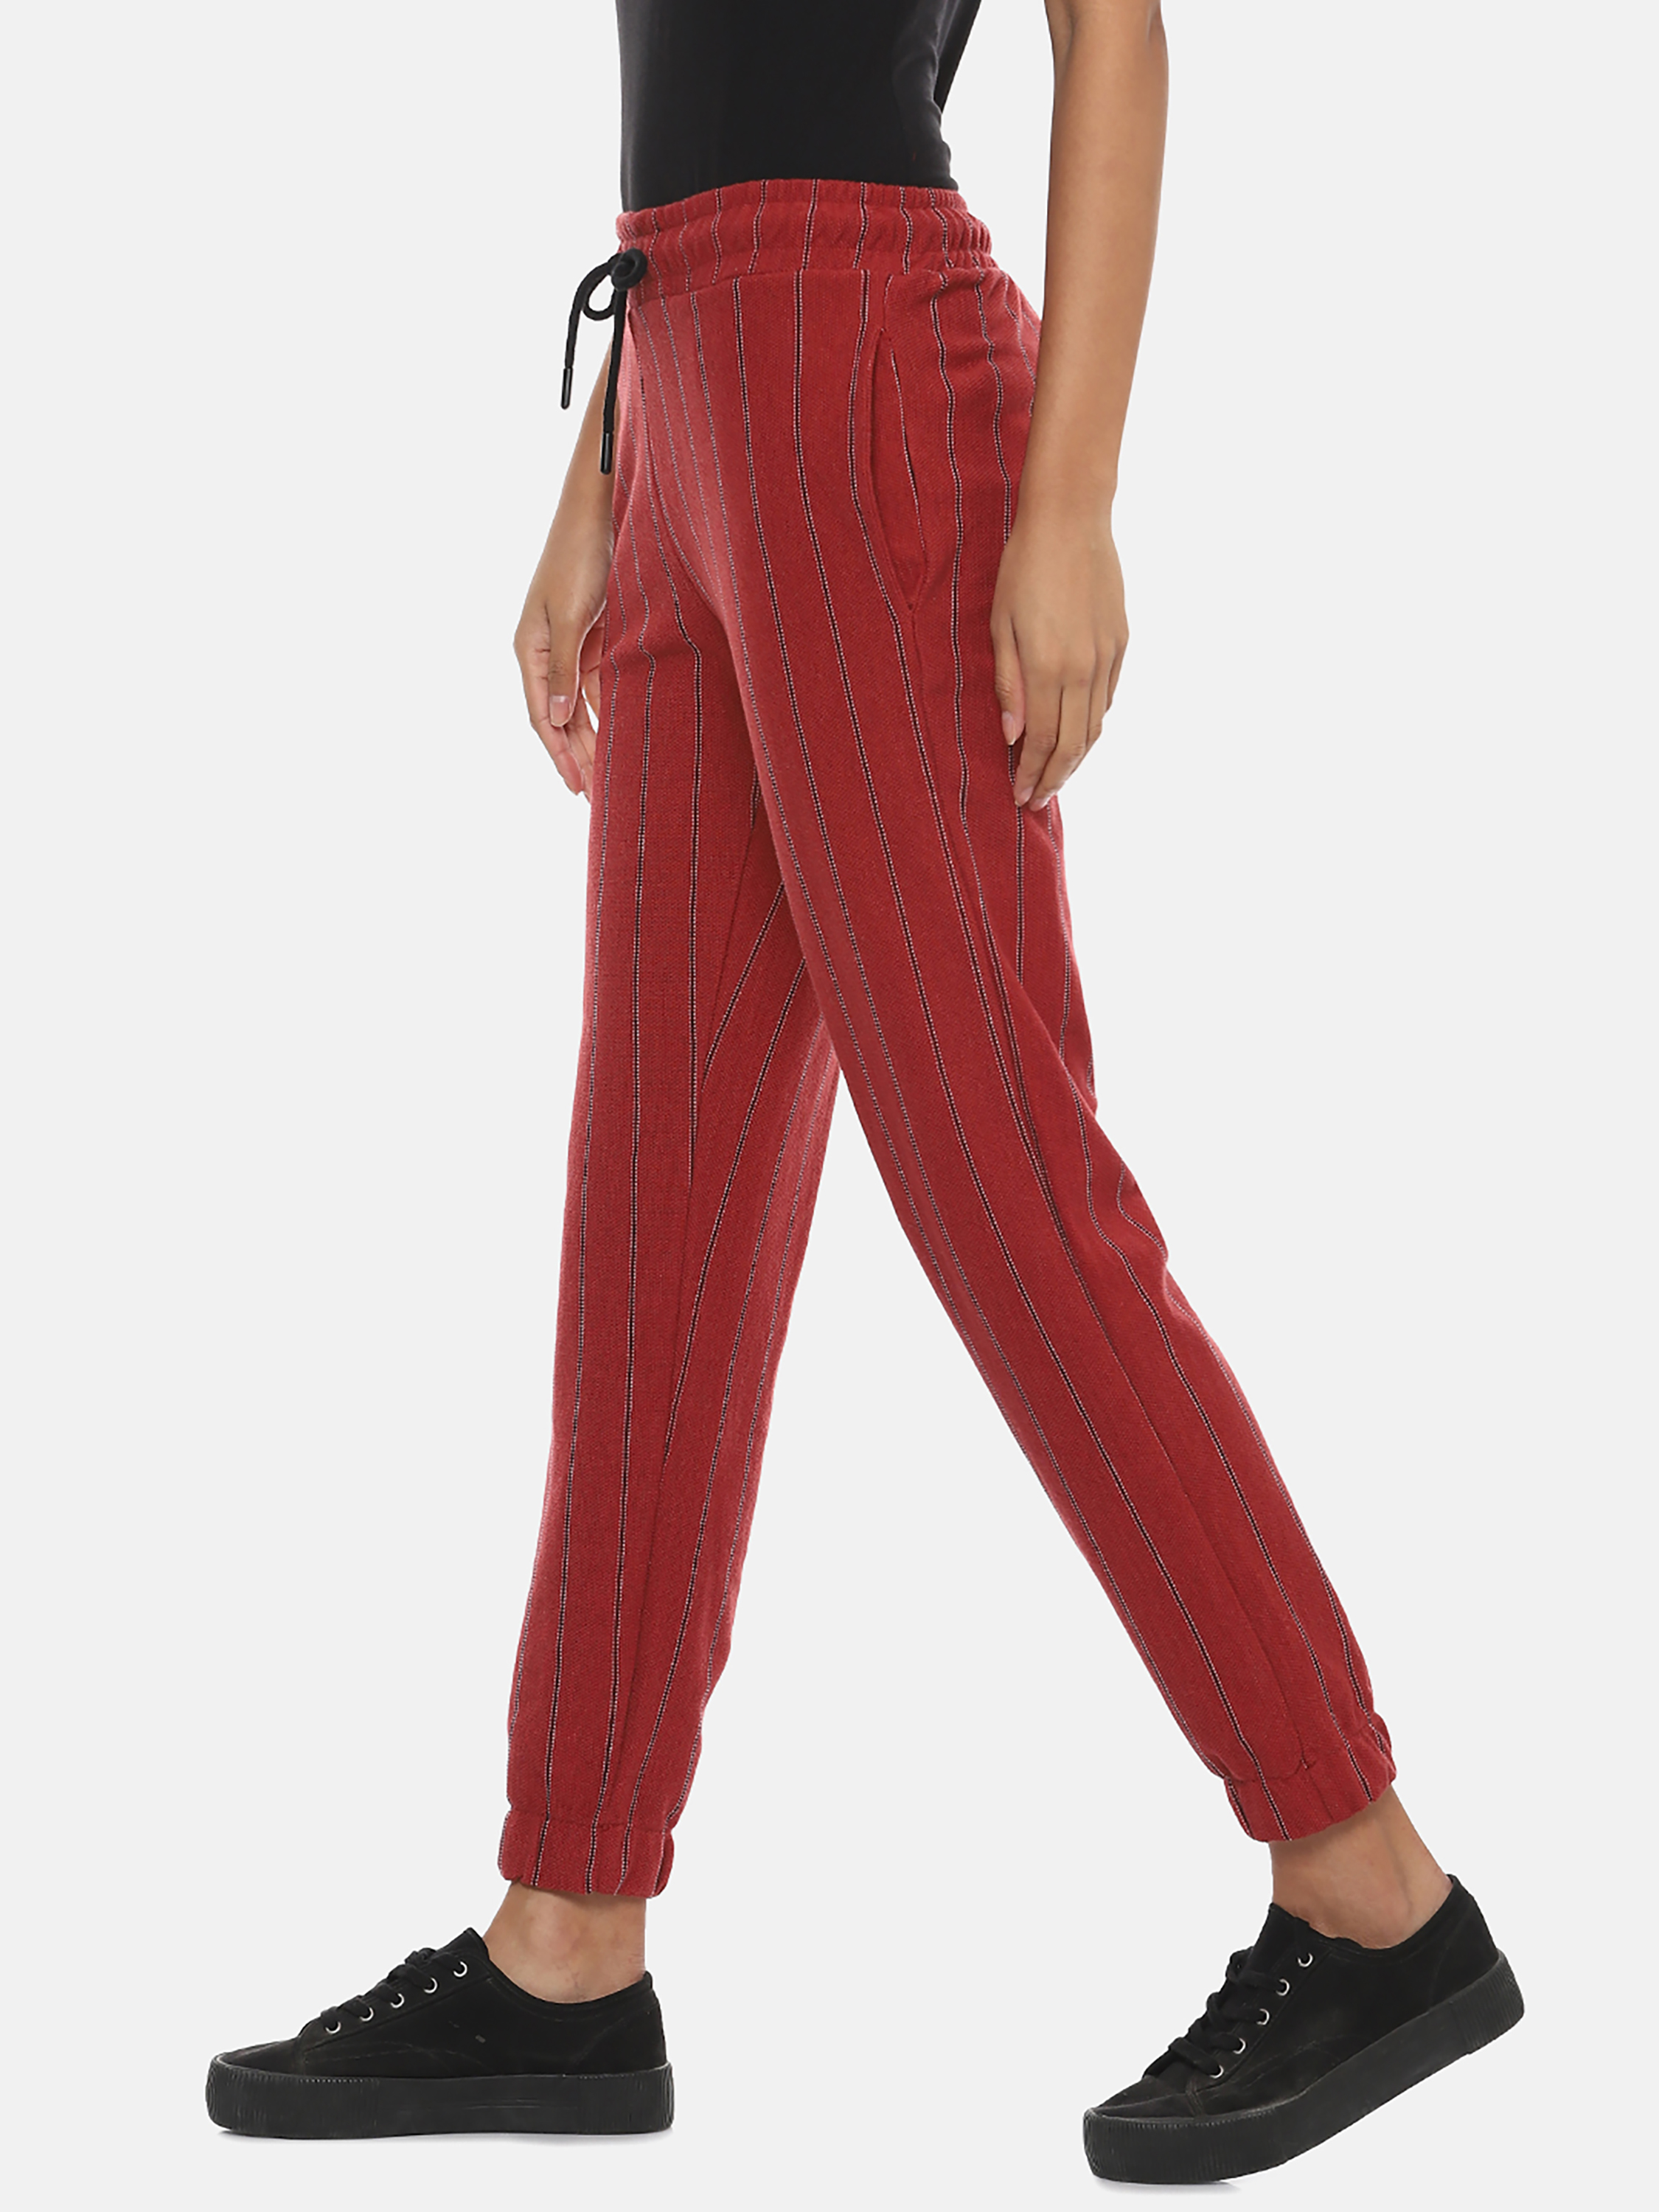 Campus Sutra Women Stylish Active Red Joggers